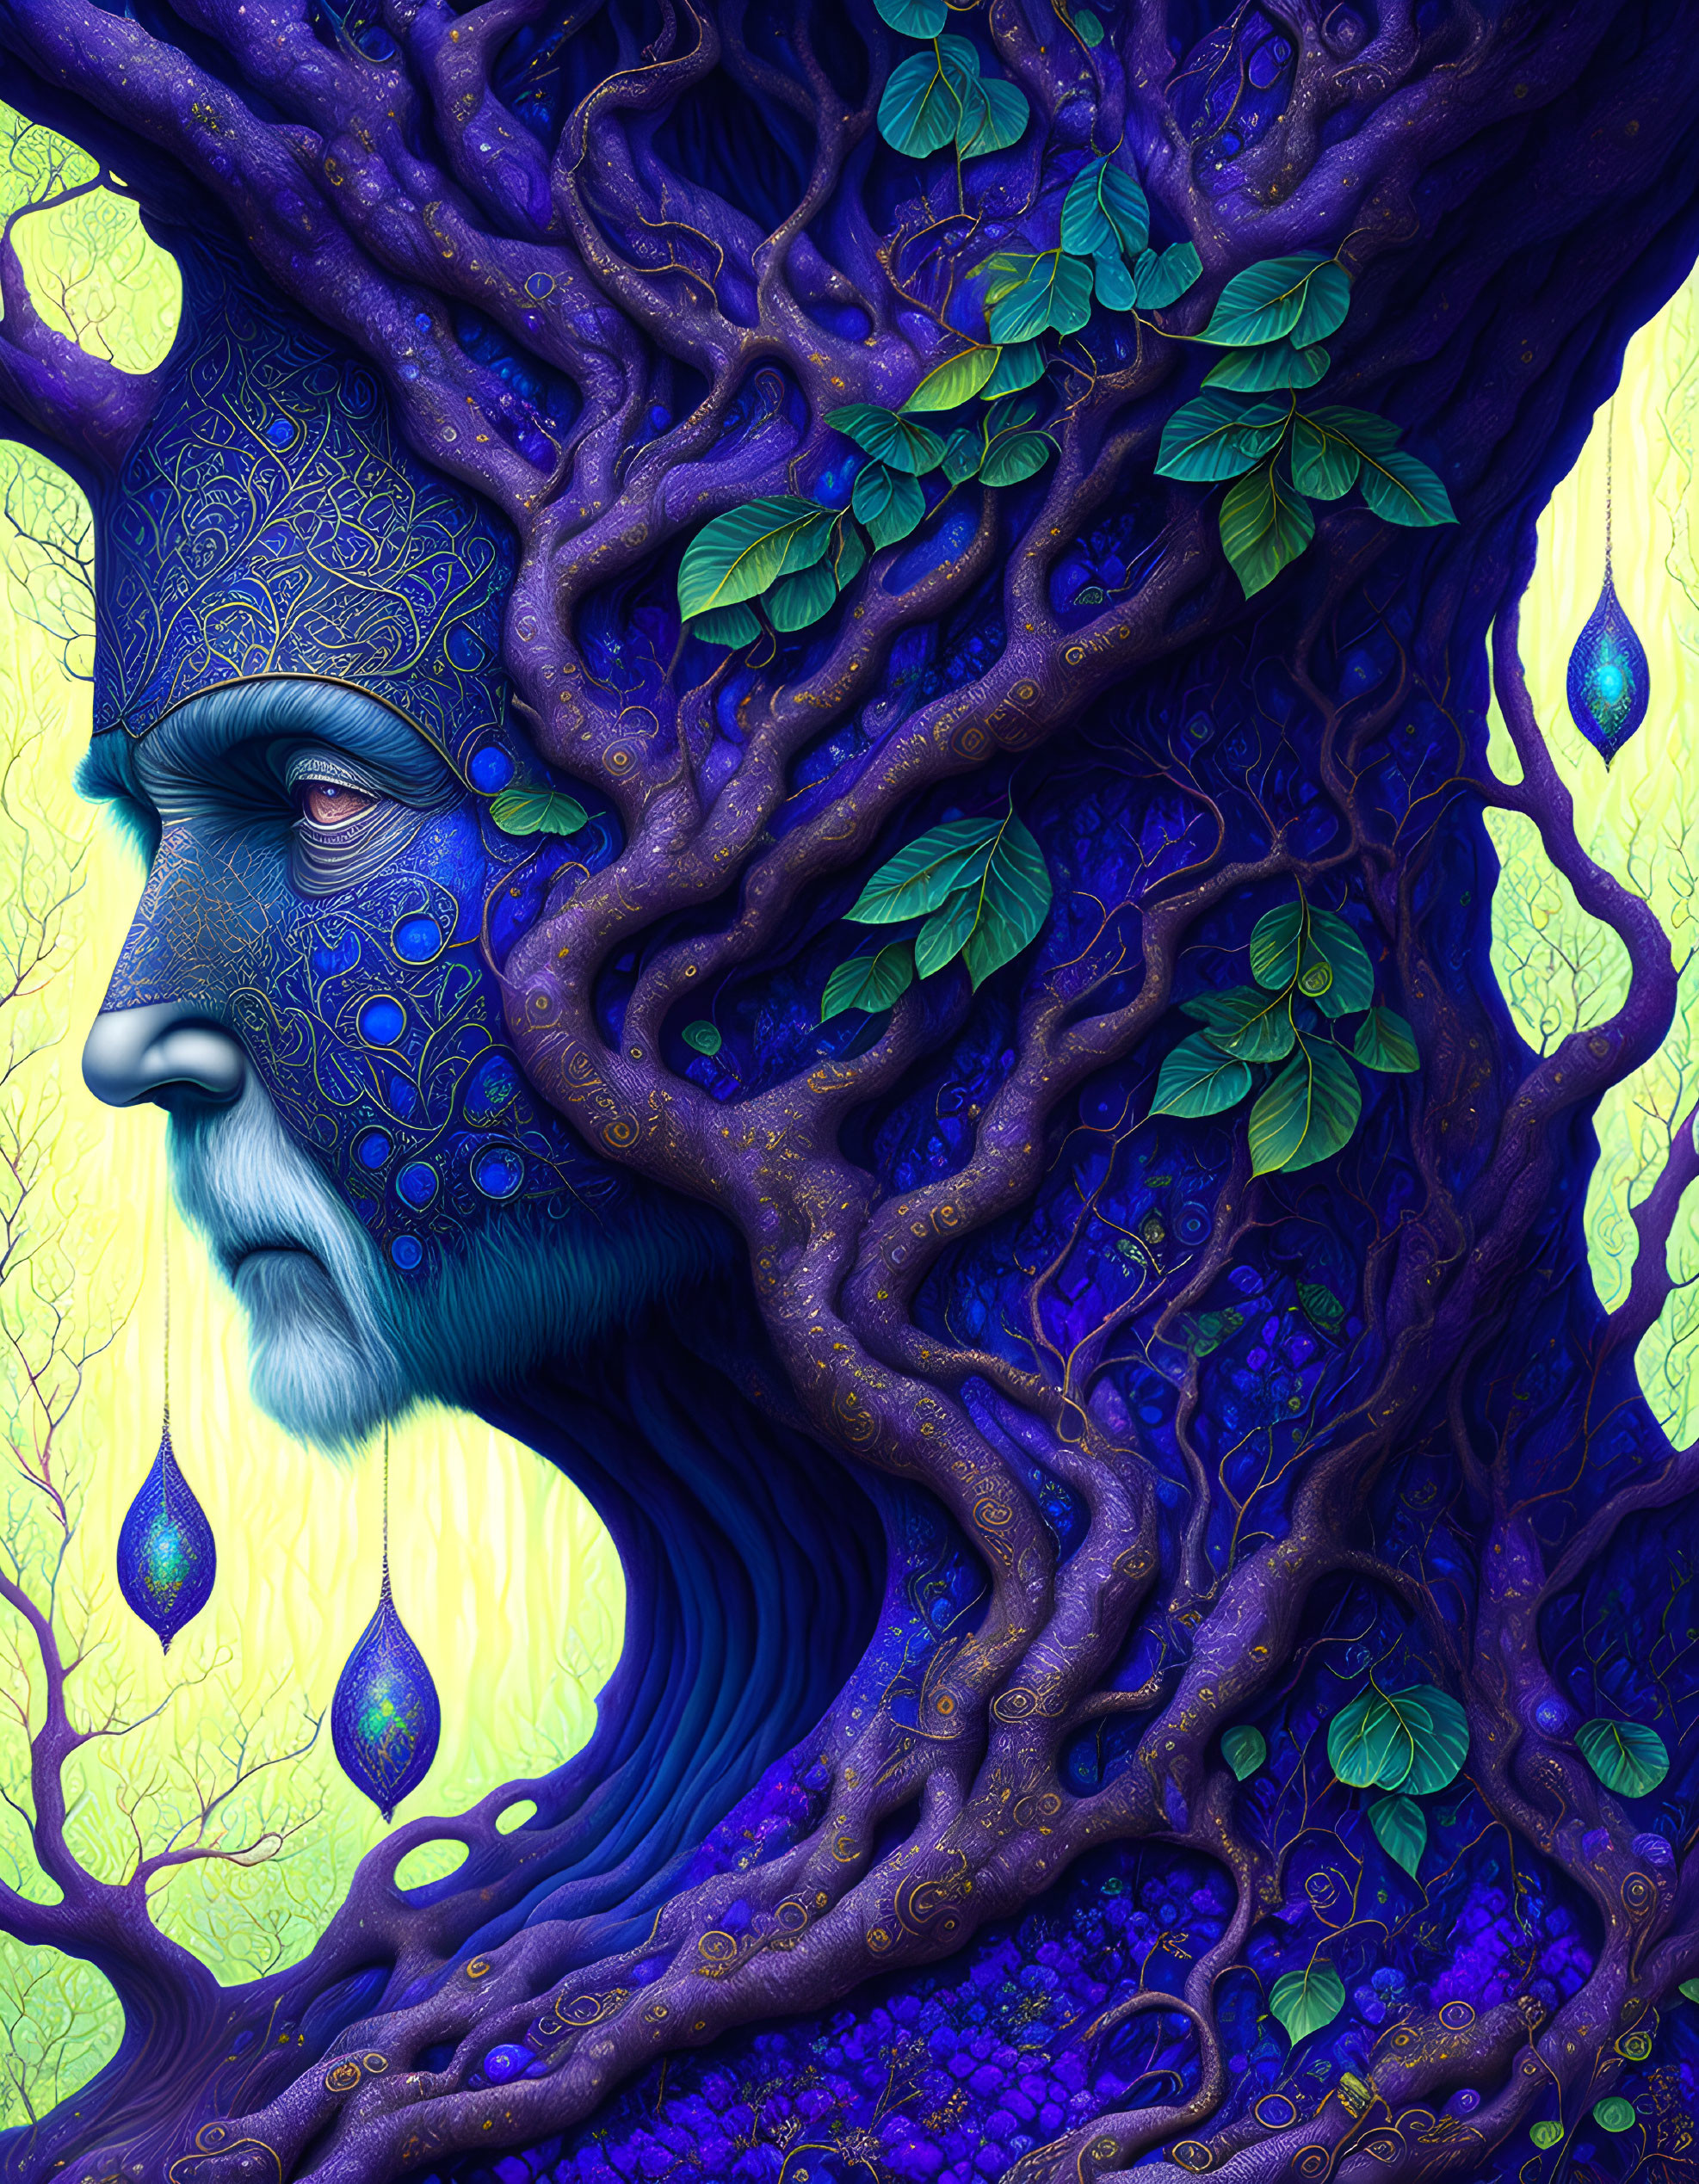 Human face merged with tree elements in vivid purple hues, intricate patterns, green leaves, and teard